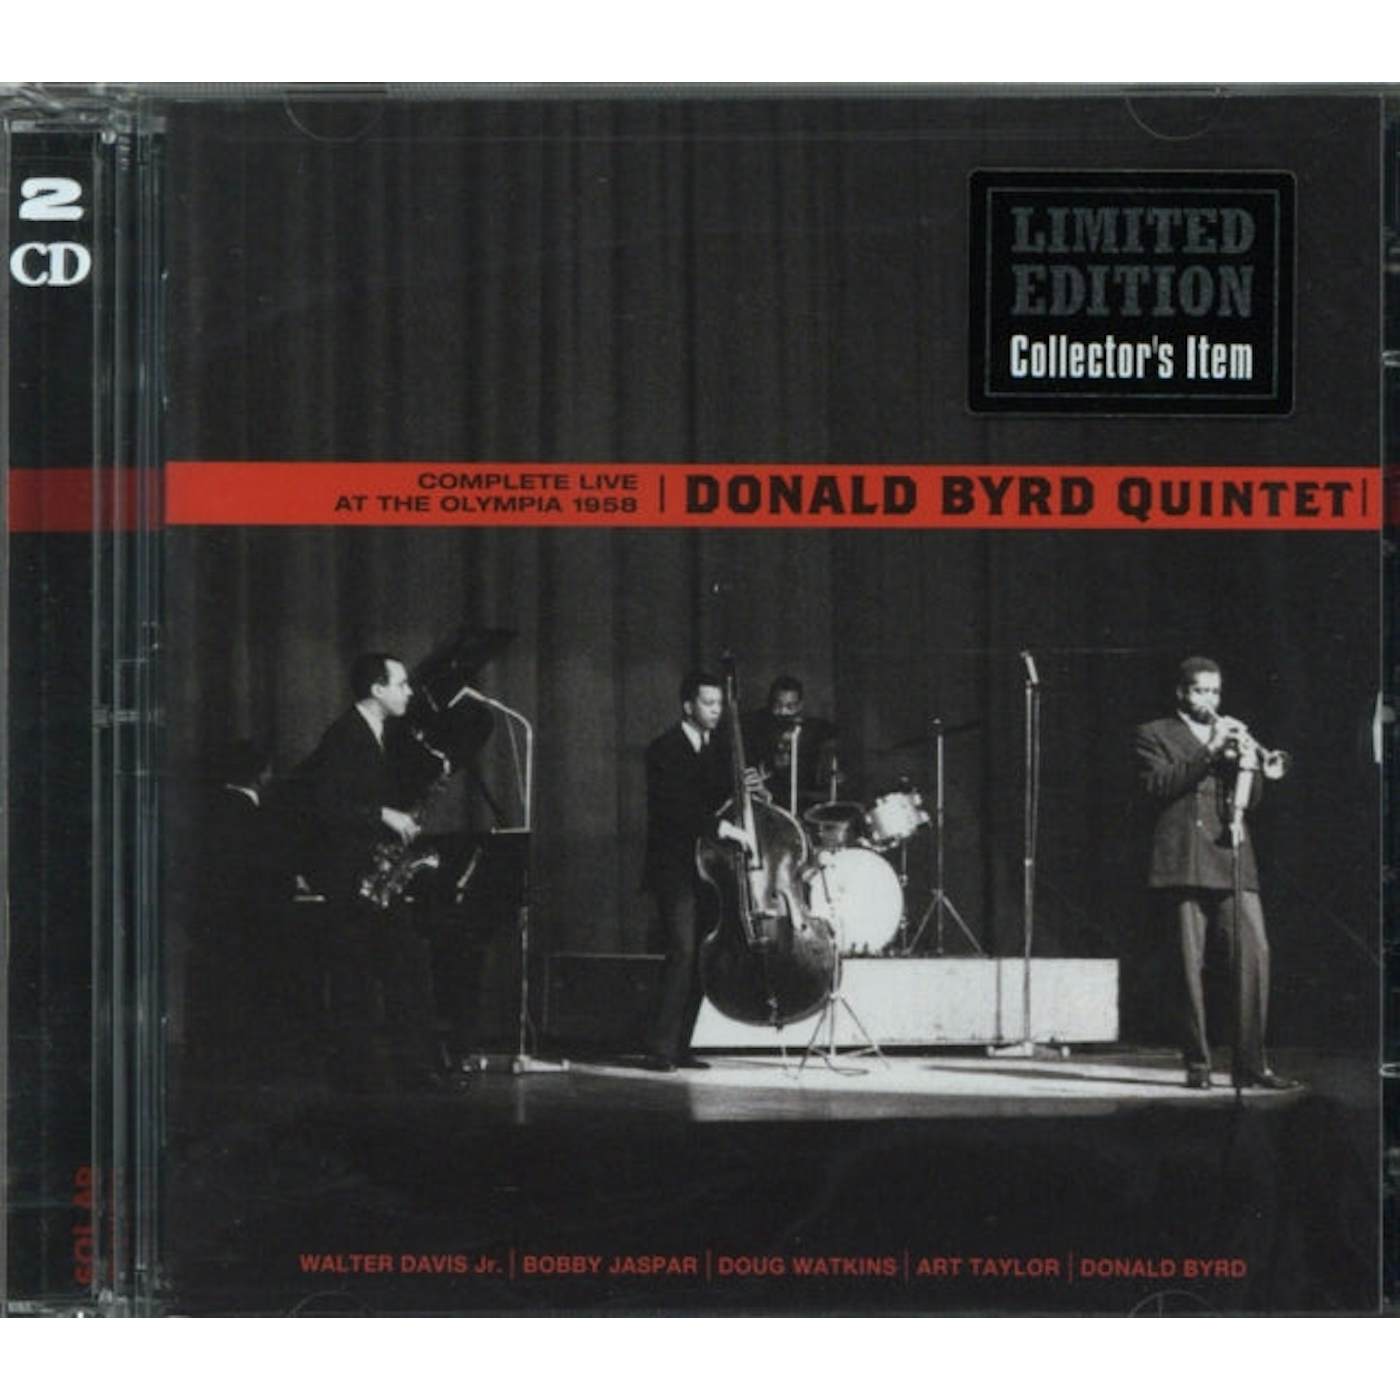 Donald Byrd CD - Complete Live At The Olympia 19 58